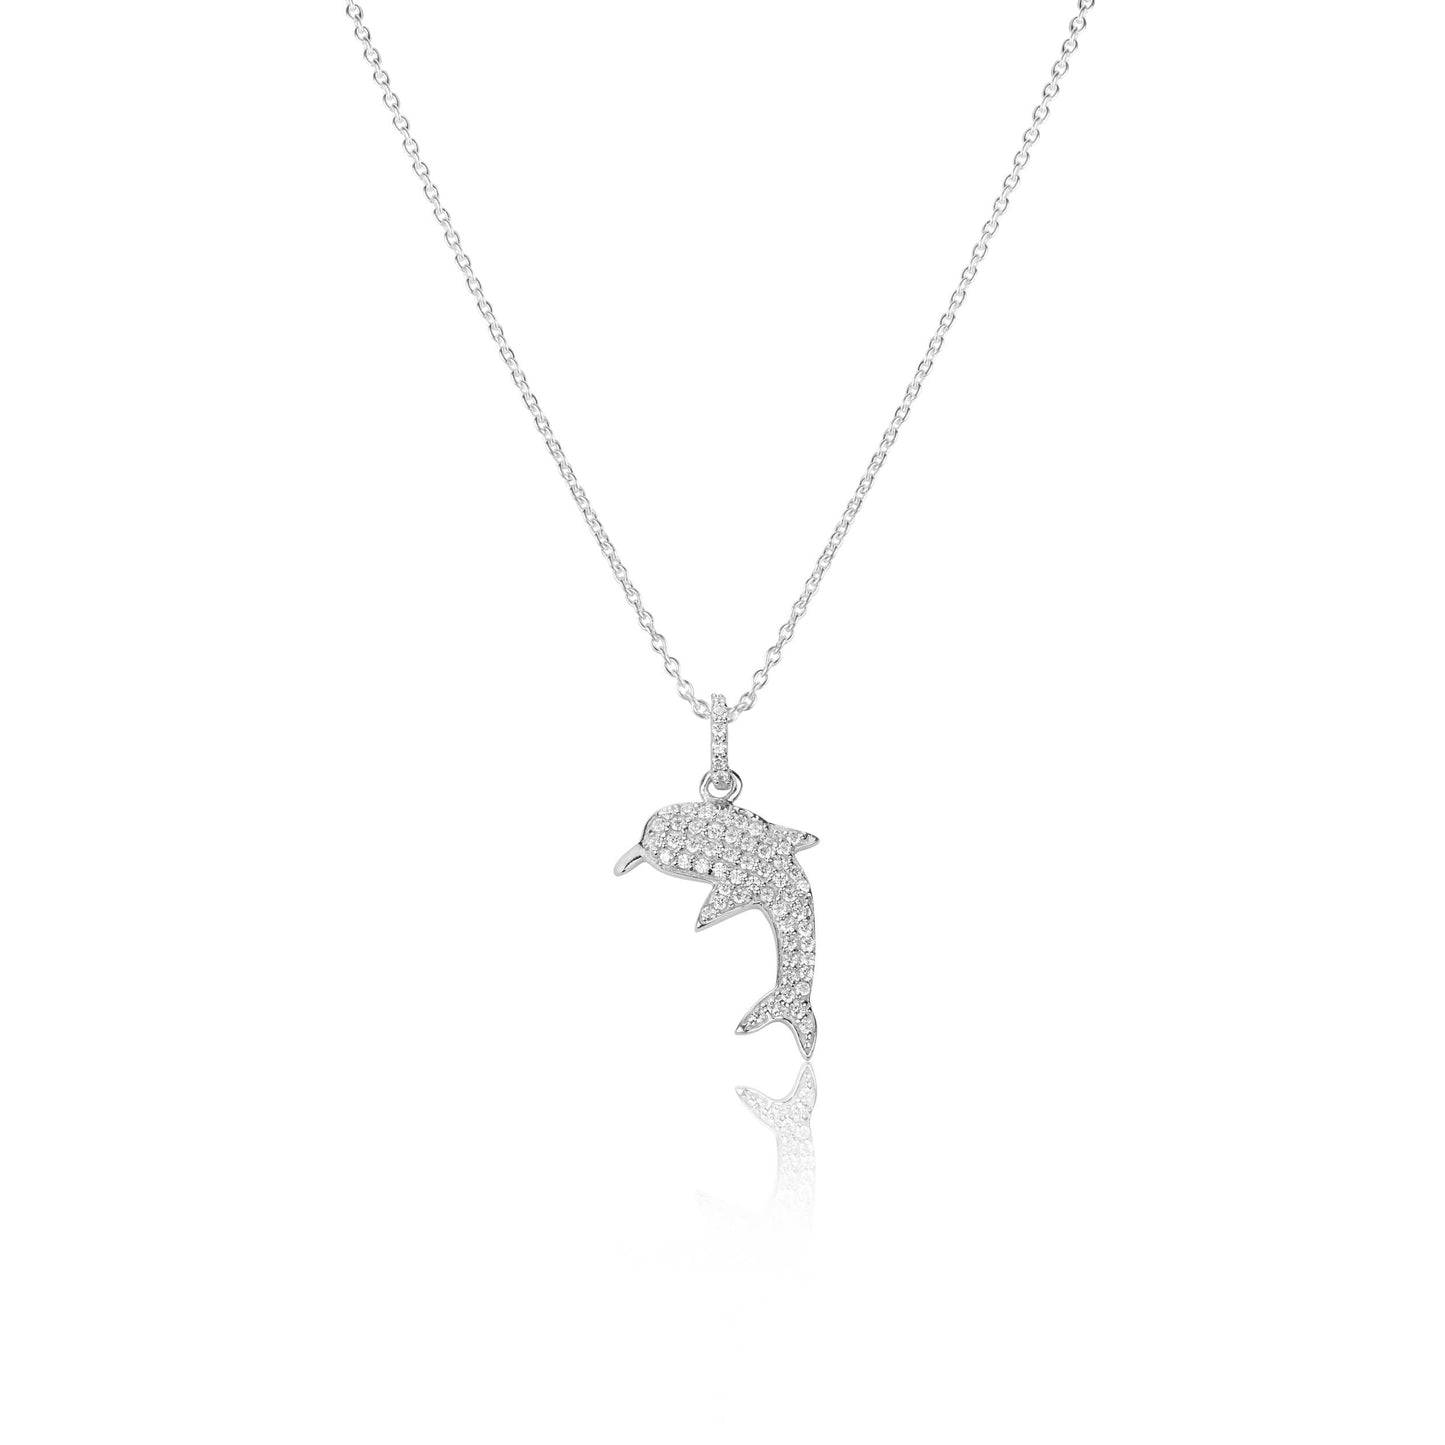 Silver Necklace Silver Dolphin Necklace